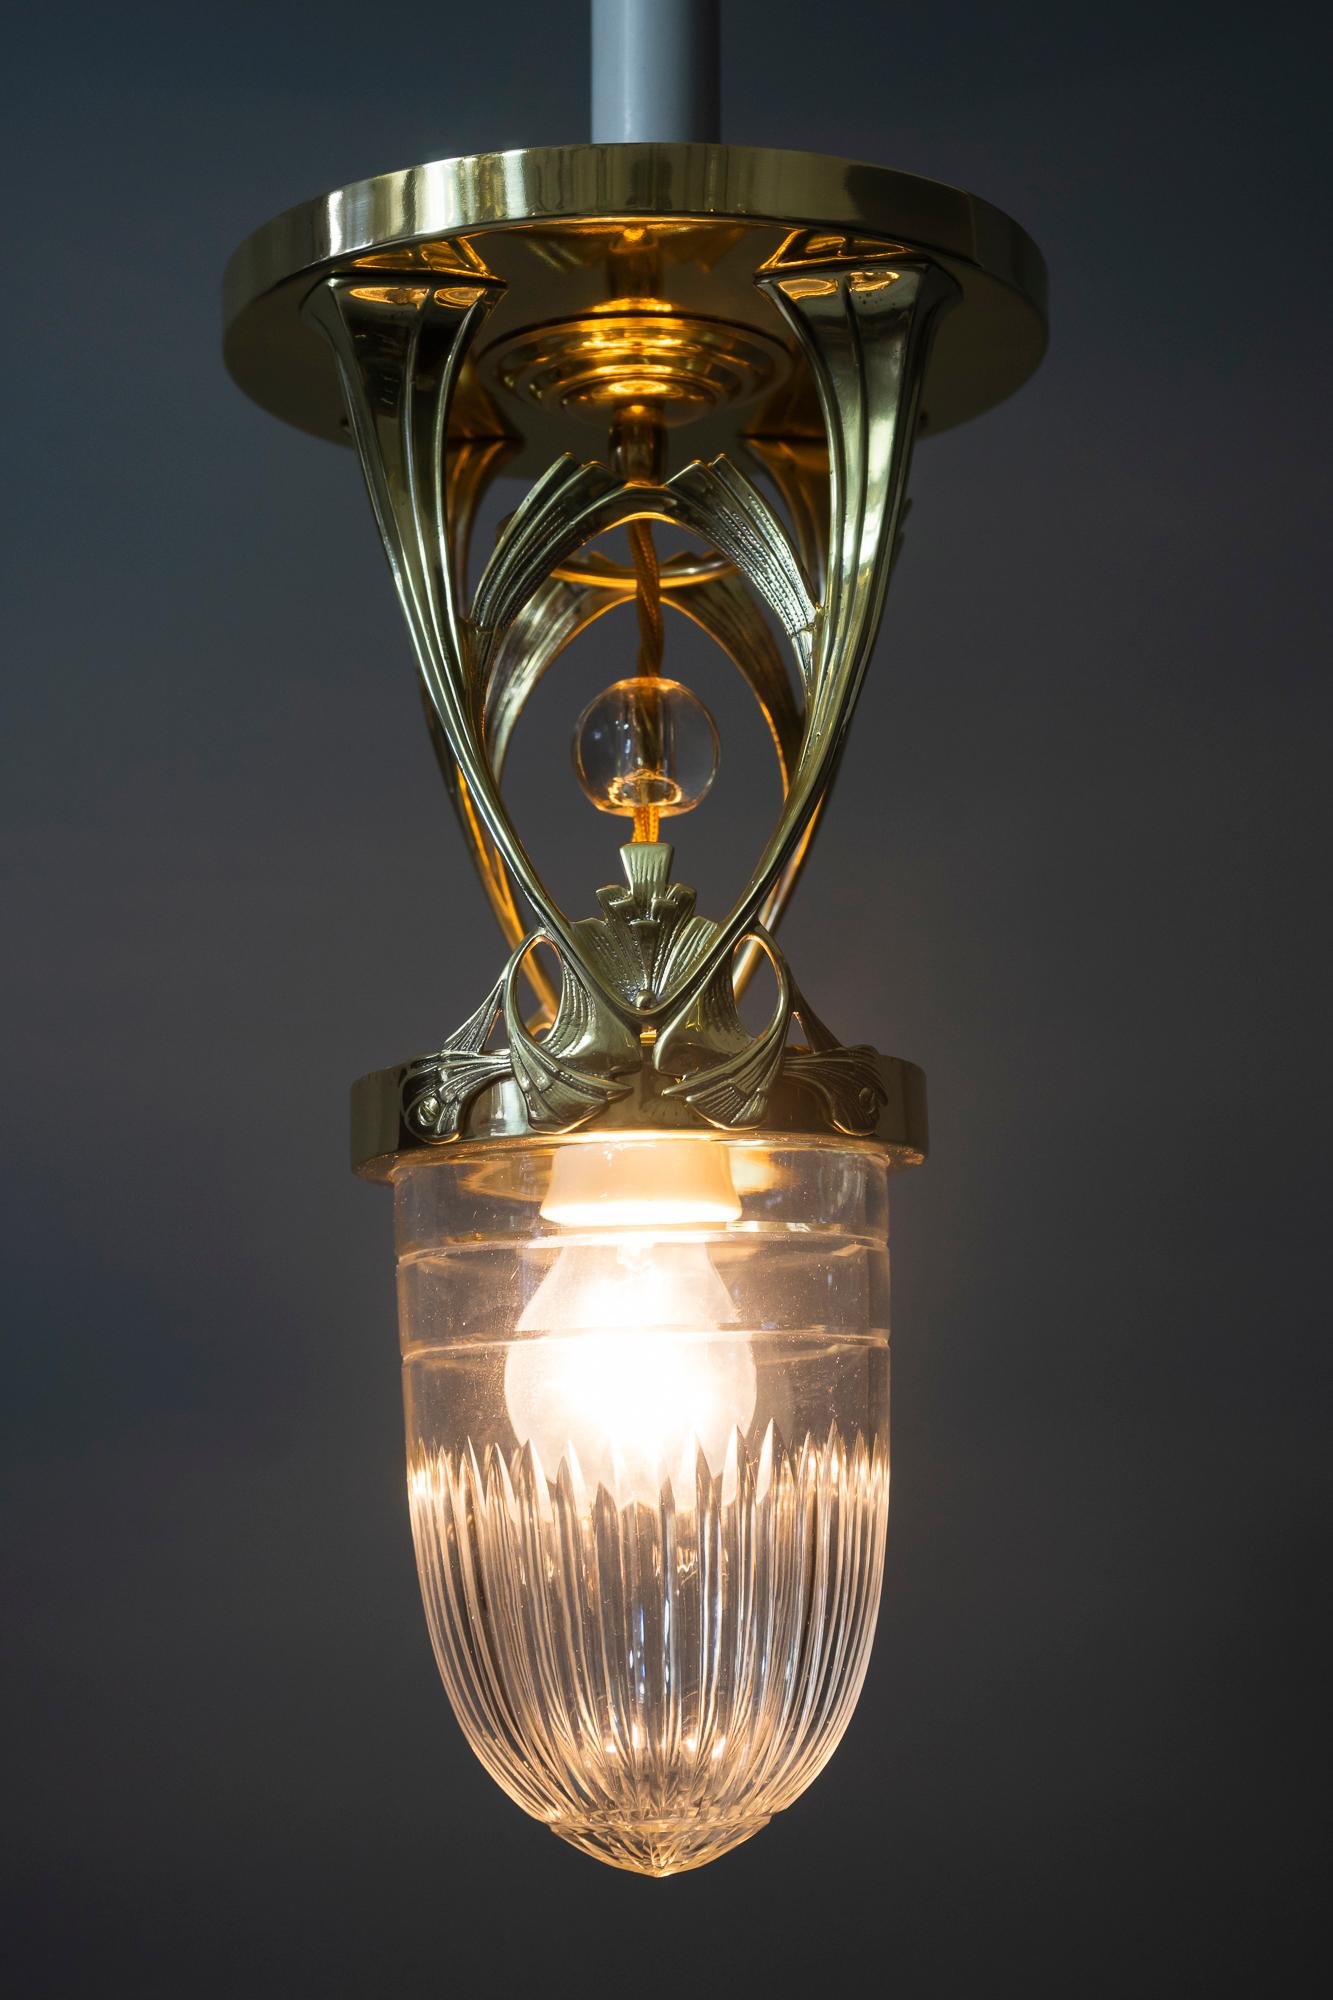 Early 20th Century Jugendstil Ceiling Lamp, Vienna, circa 1910s